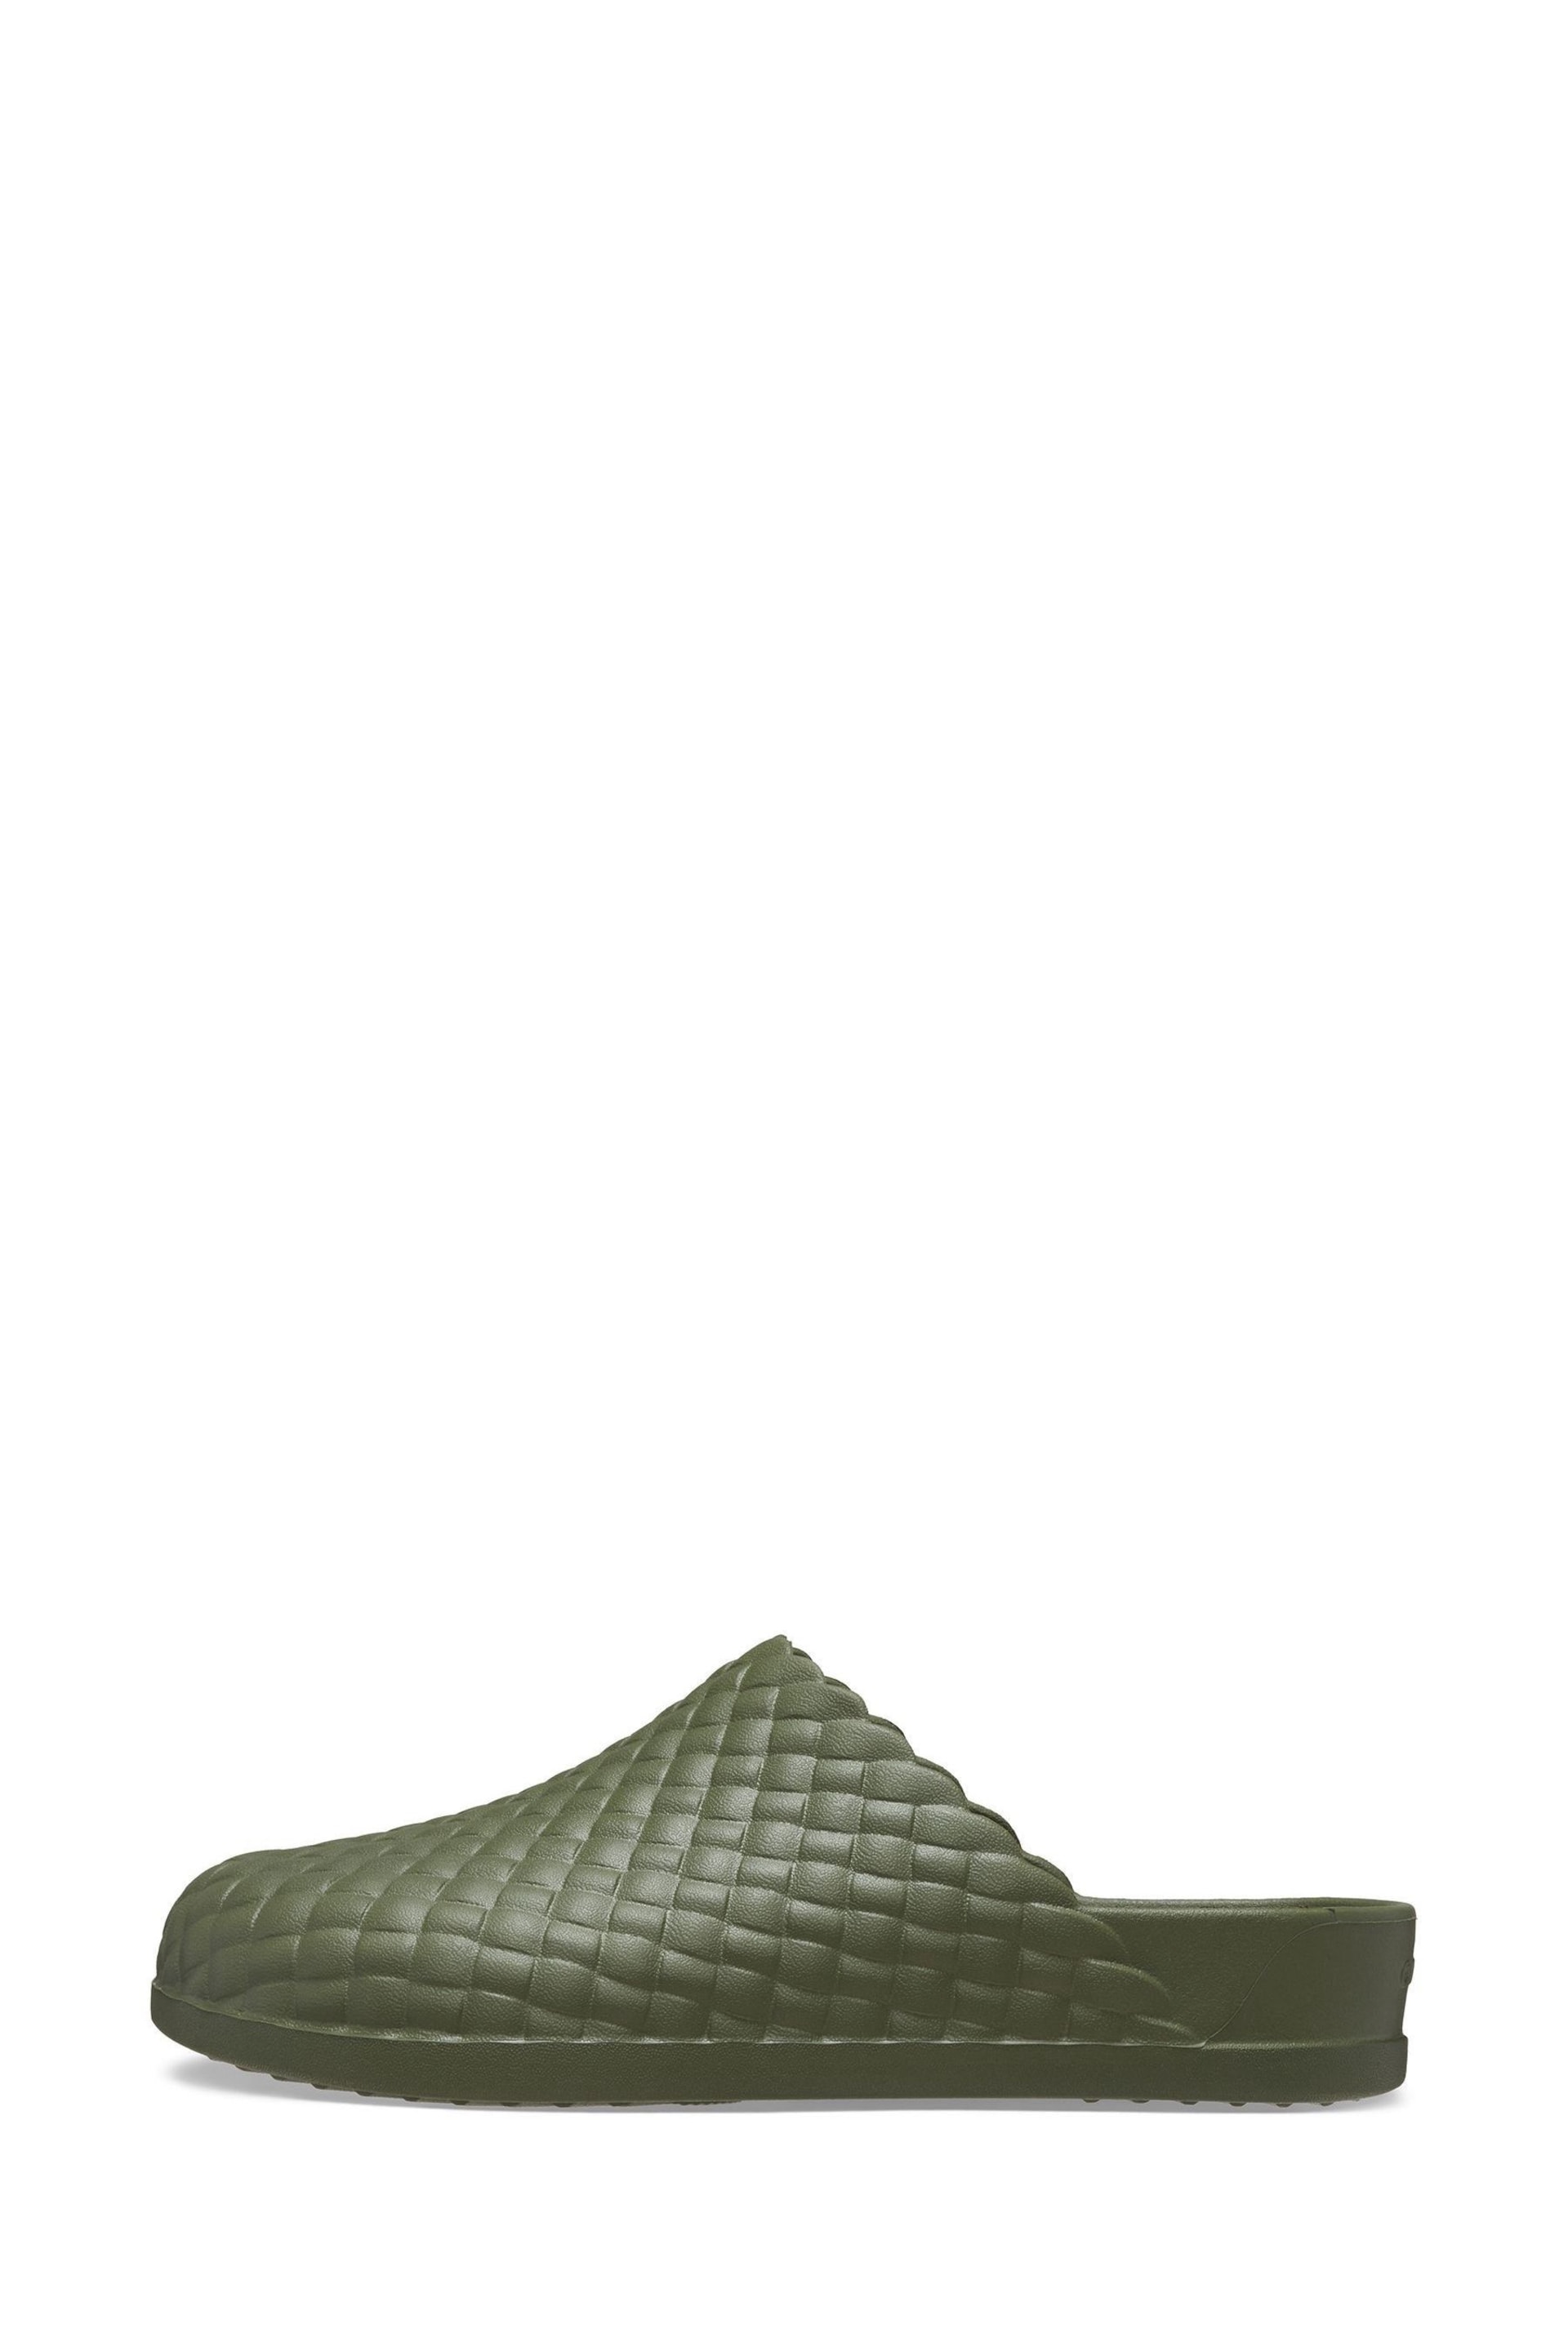 Crocs Dylan Woven Texture Clogs - Image 2 of 6